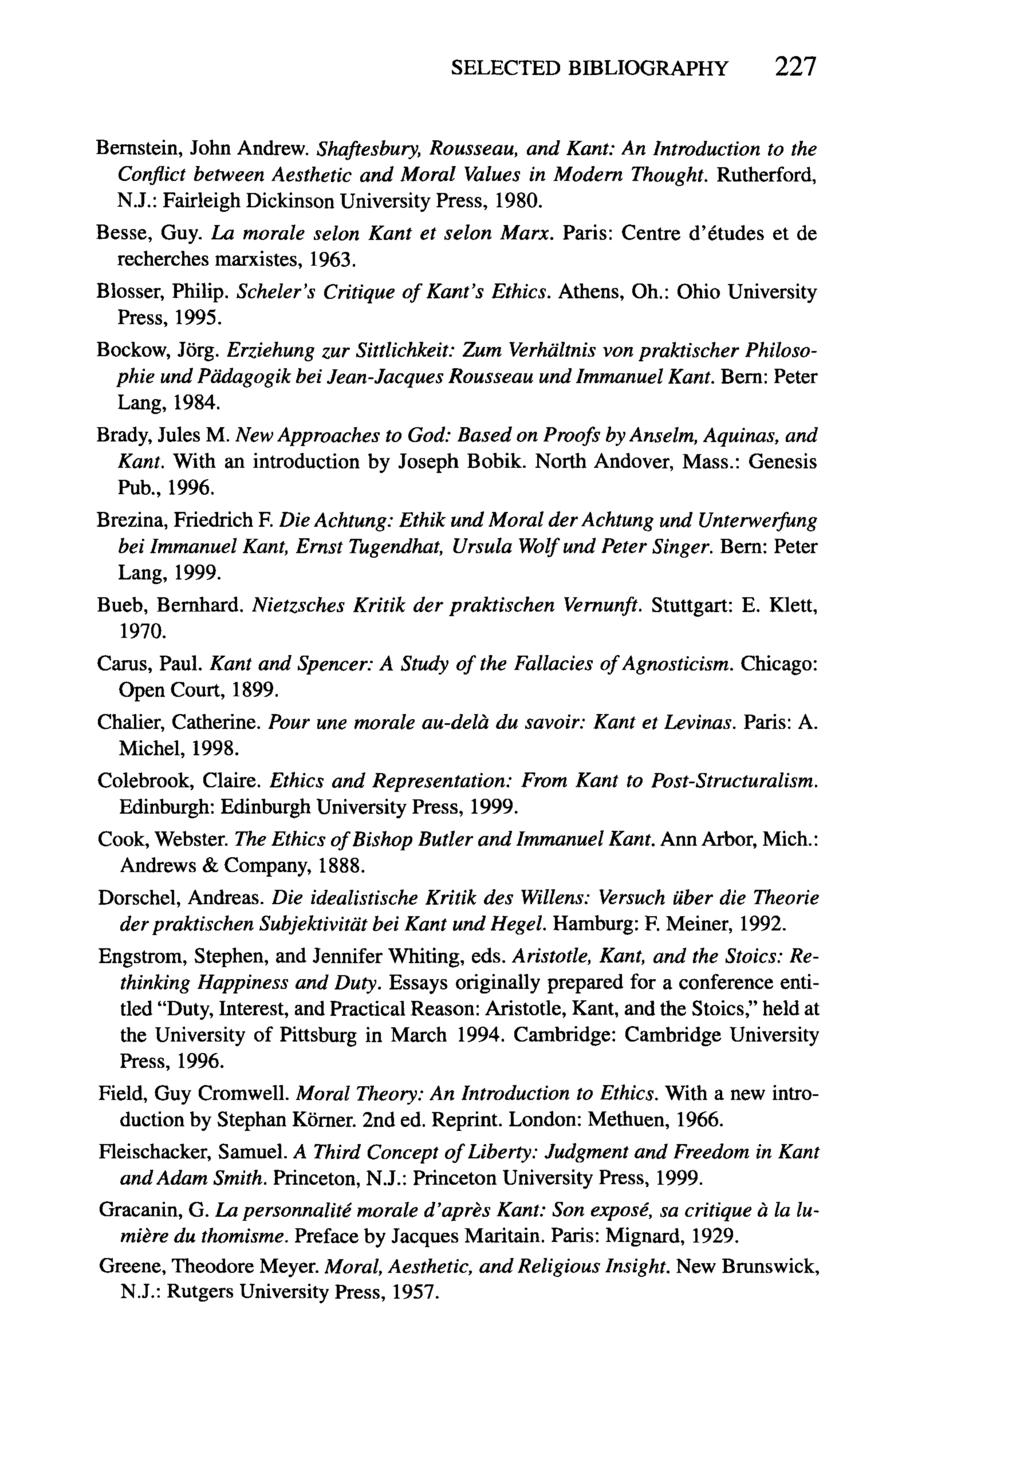 SELECTED BIBLIOGRAPHY 227 Bernstein, John Andrew. Shaftesbury, Rousseau, and Kant: An Introduction to the Conflict between Aesthetic and Moral Values in Modern Thought. Rutherford, N.J.: Fairleigh Dickinson University Press, 1980.